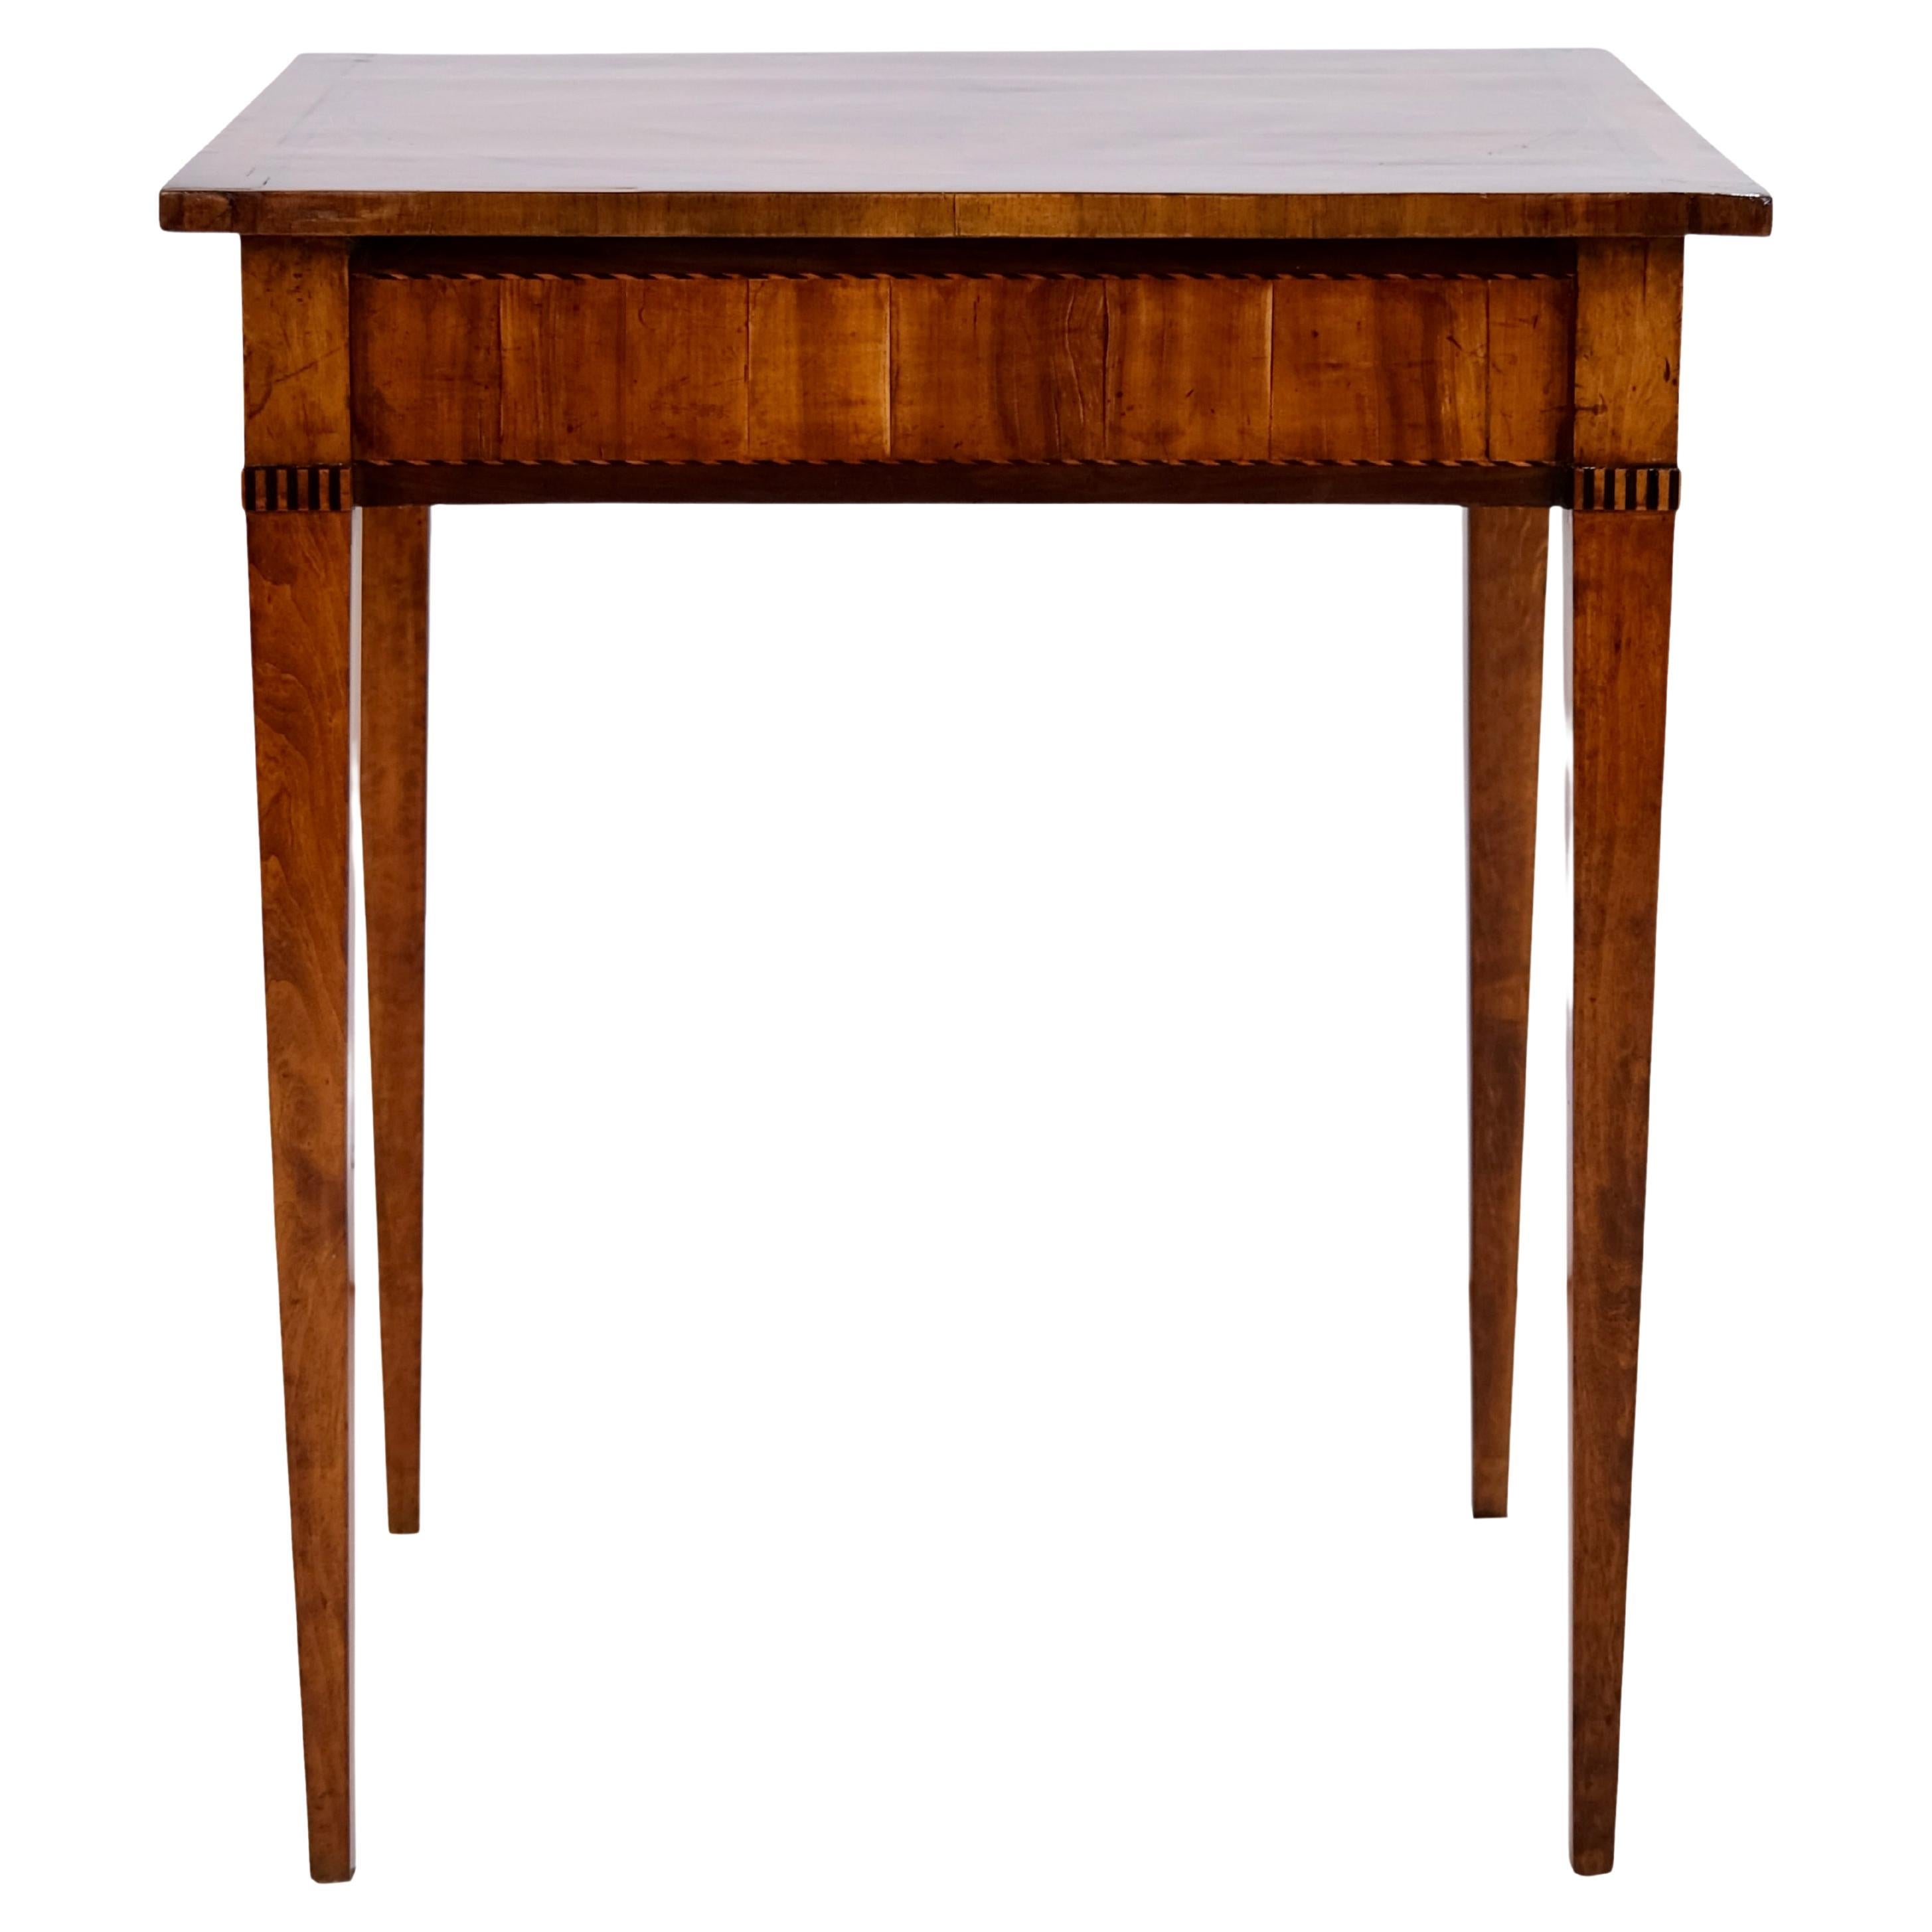 Handpolished 1780s Louis Seize XVI Side Table in Cherry Wood